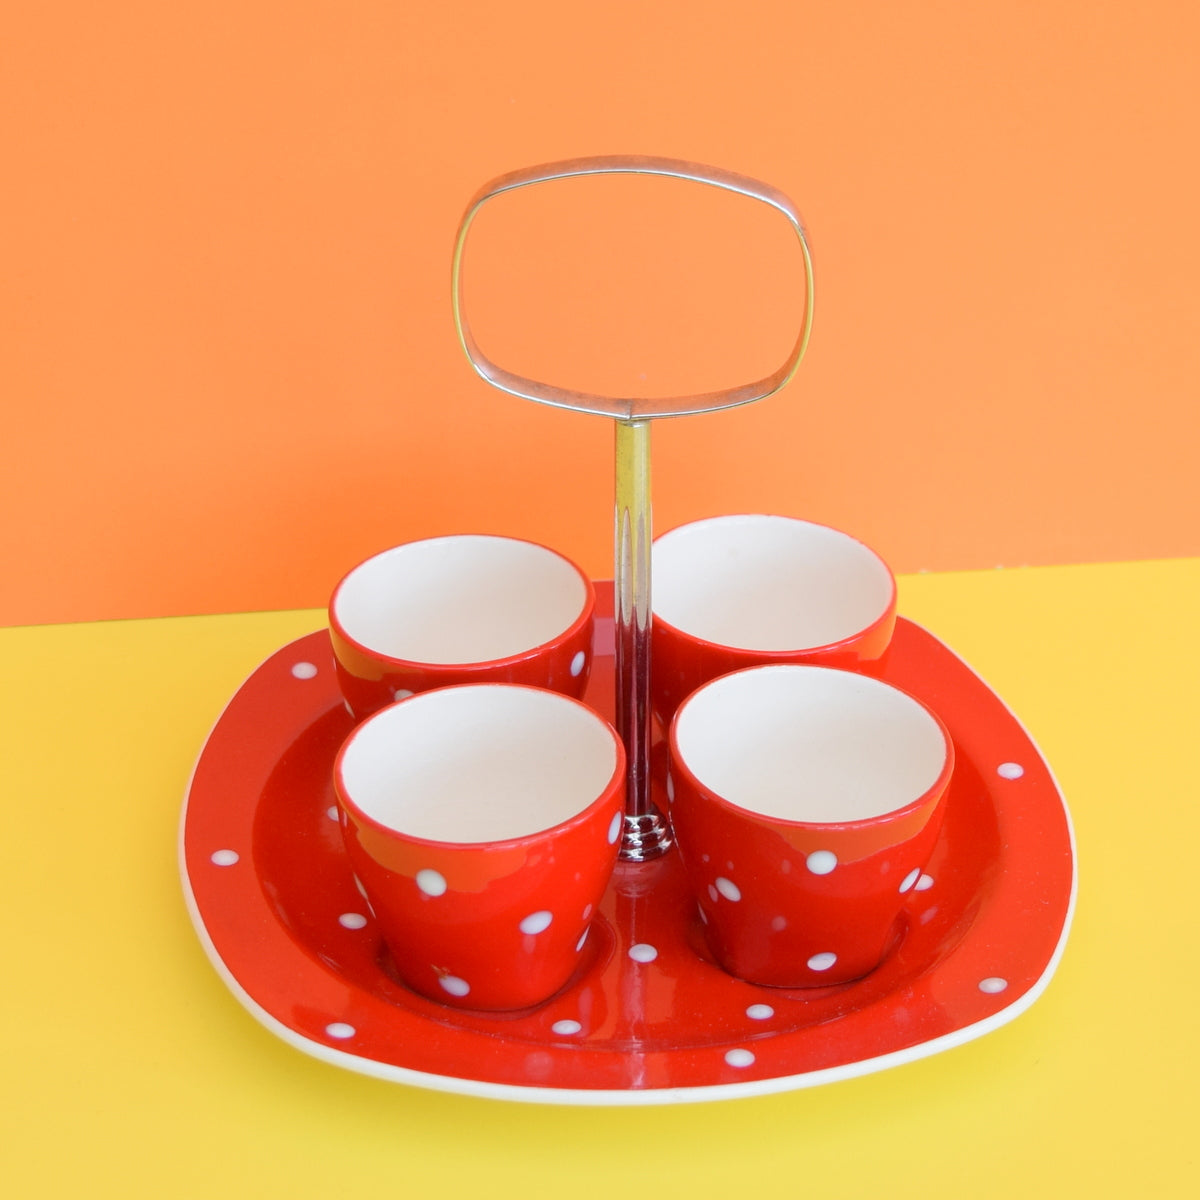 Vintage 1950s Midwinter Spotty Domino Egg Cups On Stand - Red